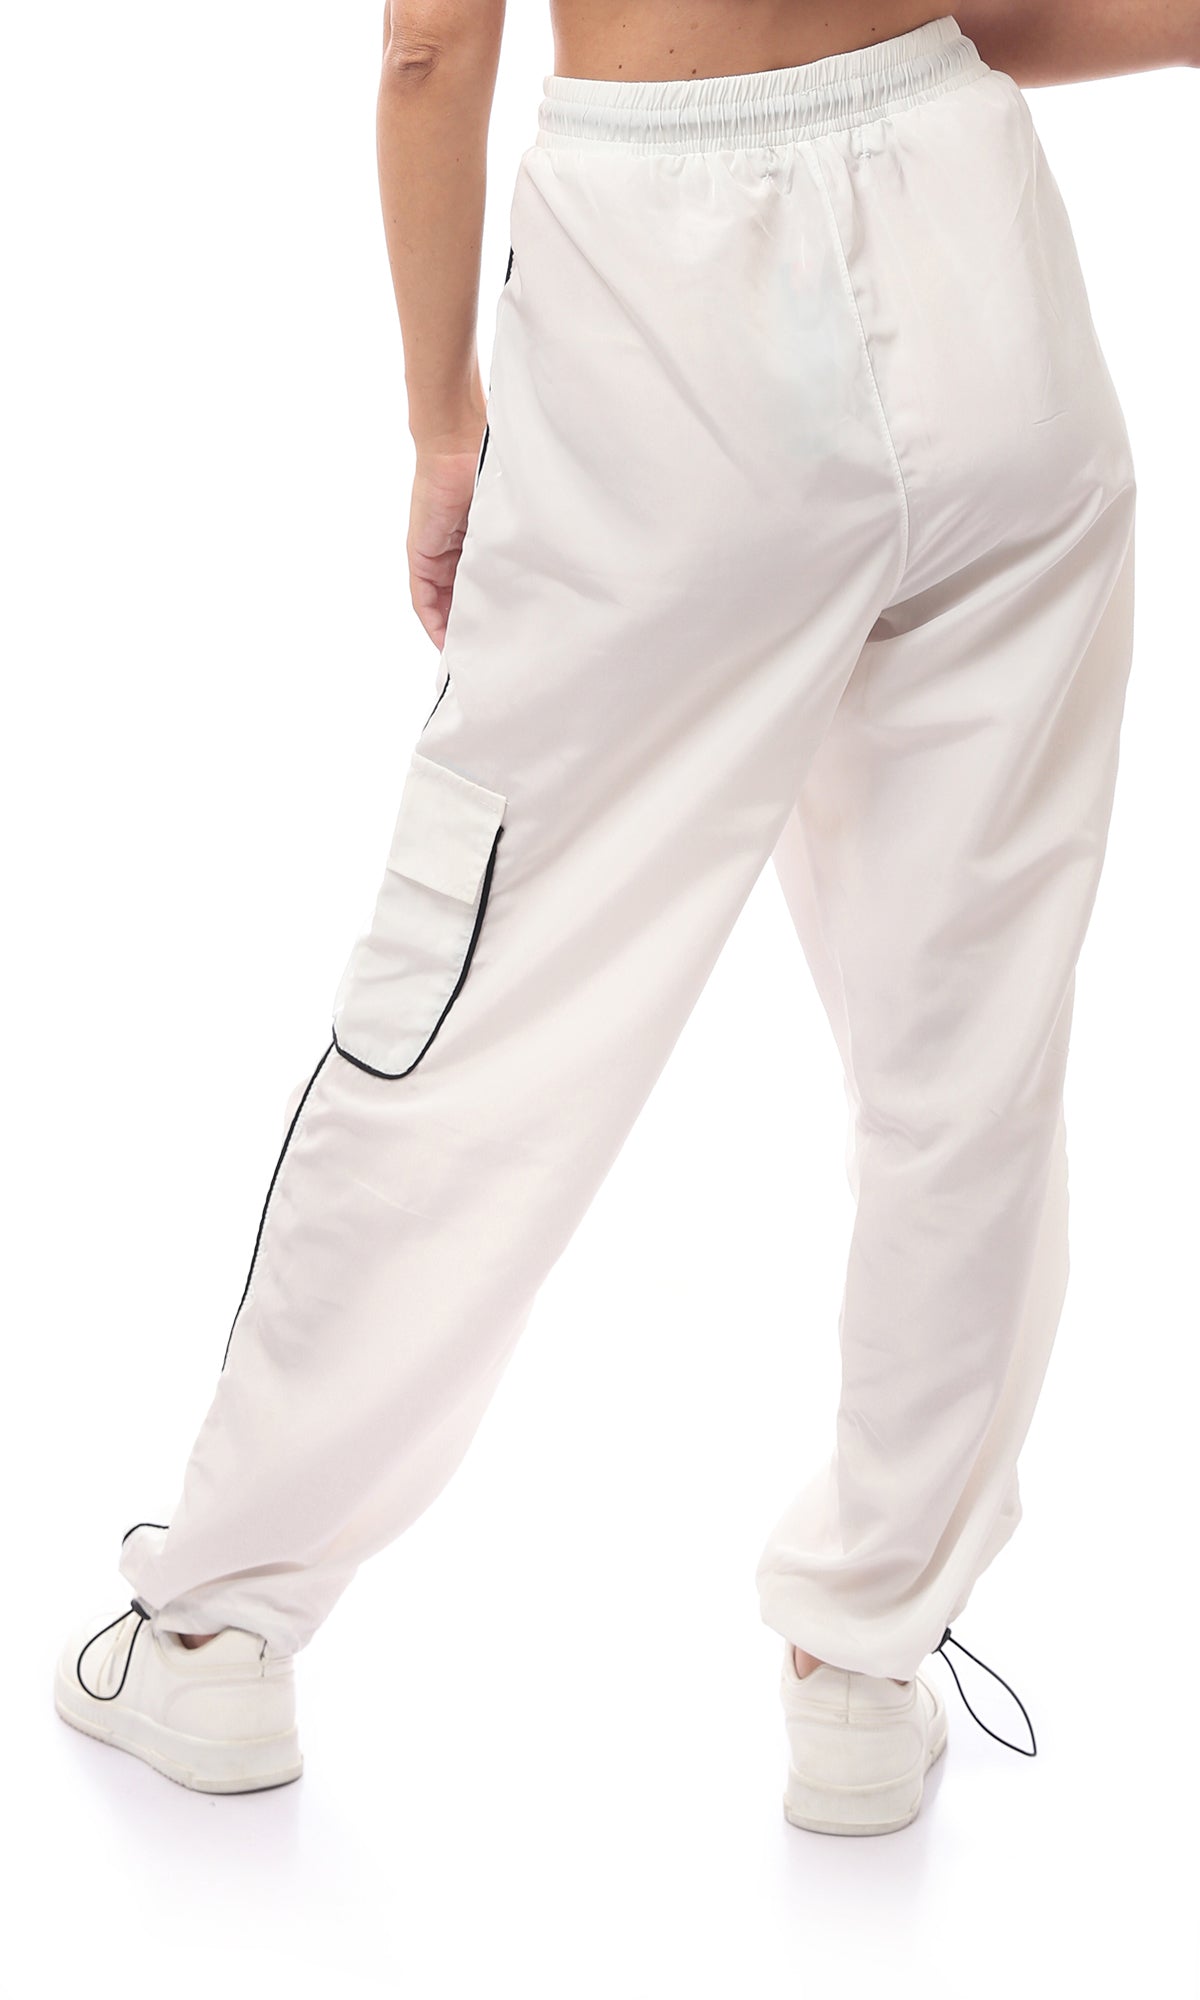 O170606 Cotton Slip On Trousers With Drawstrings And Hem